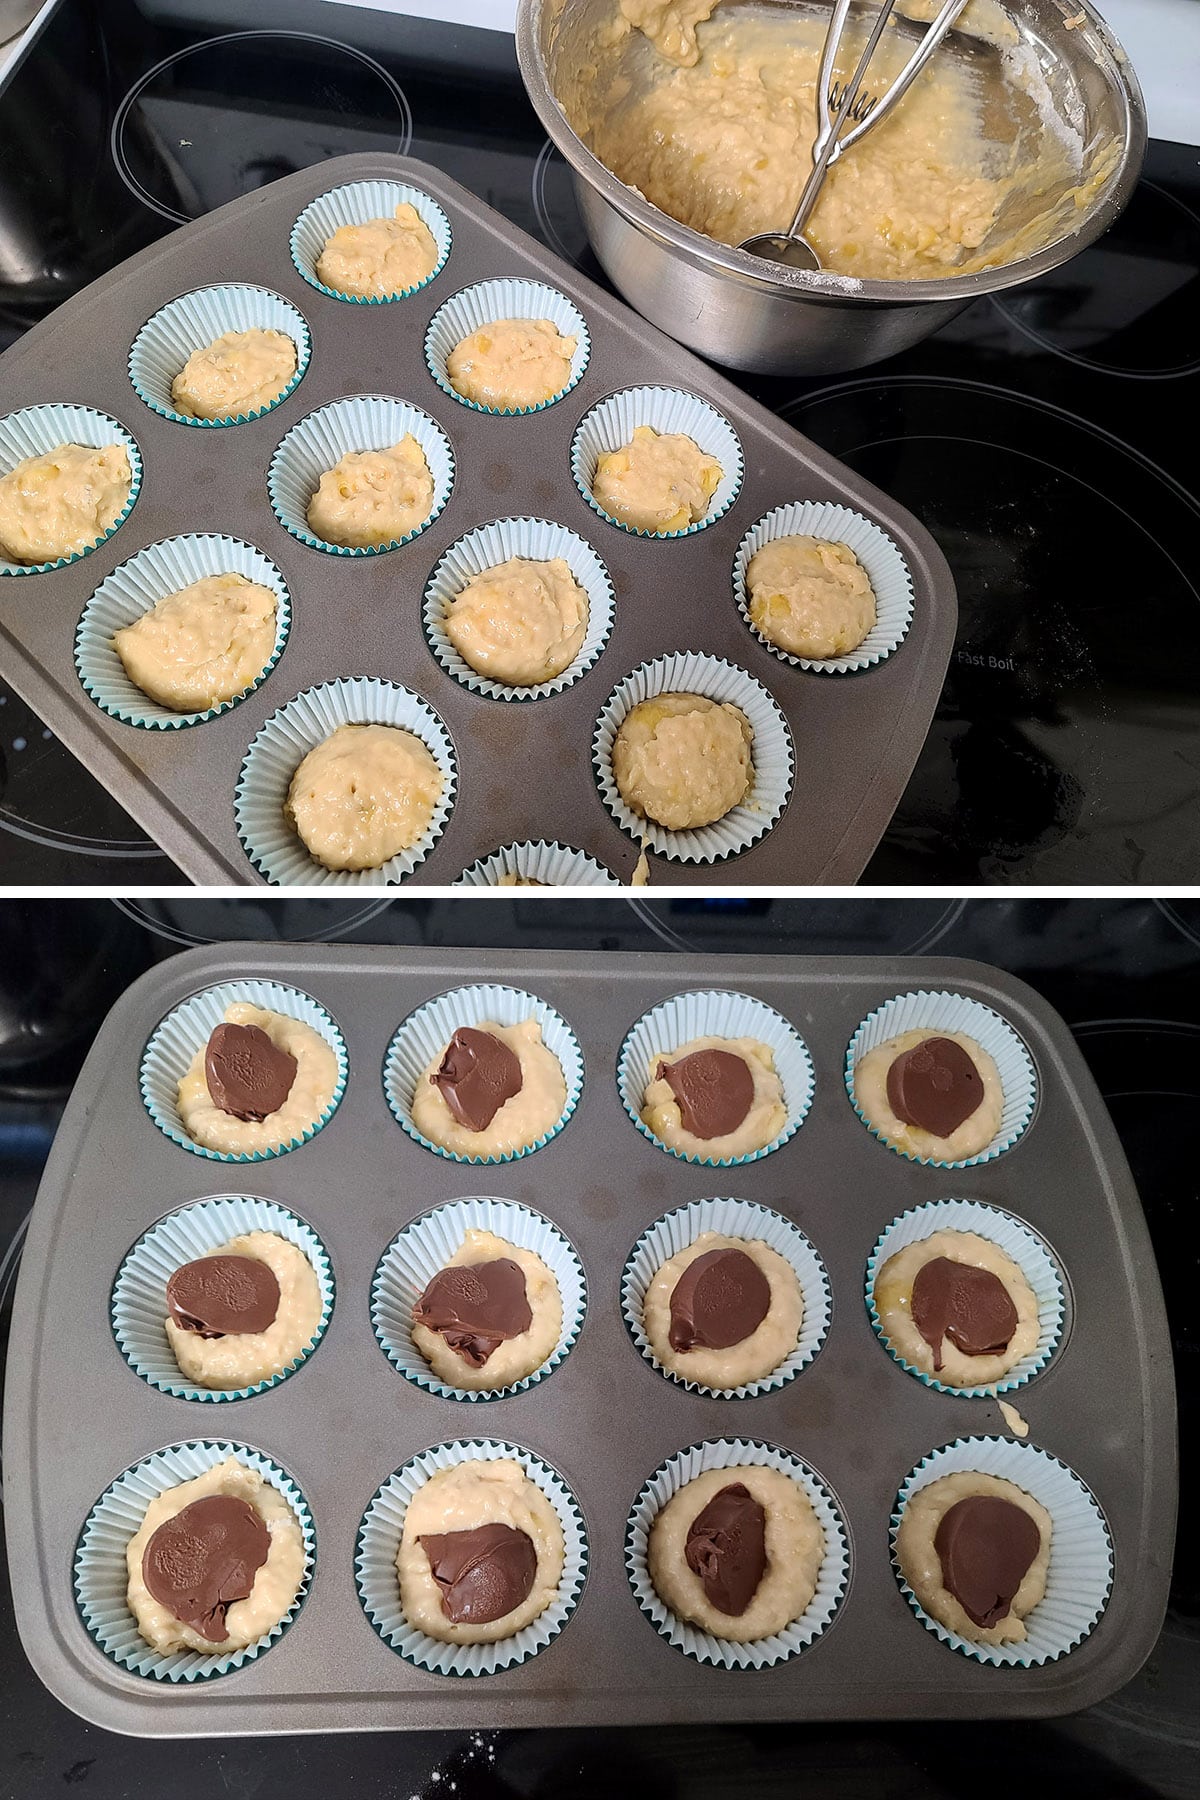 A 2 part image showing the first round of muffin batter in the muffins cups, then each topped with a frozen lump of Nutella.